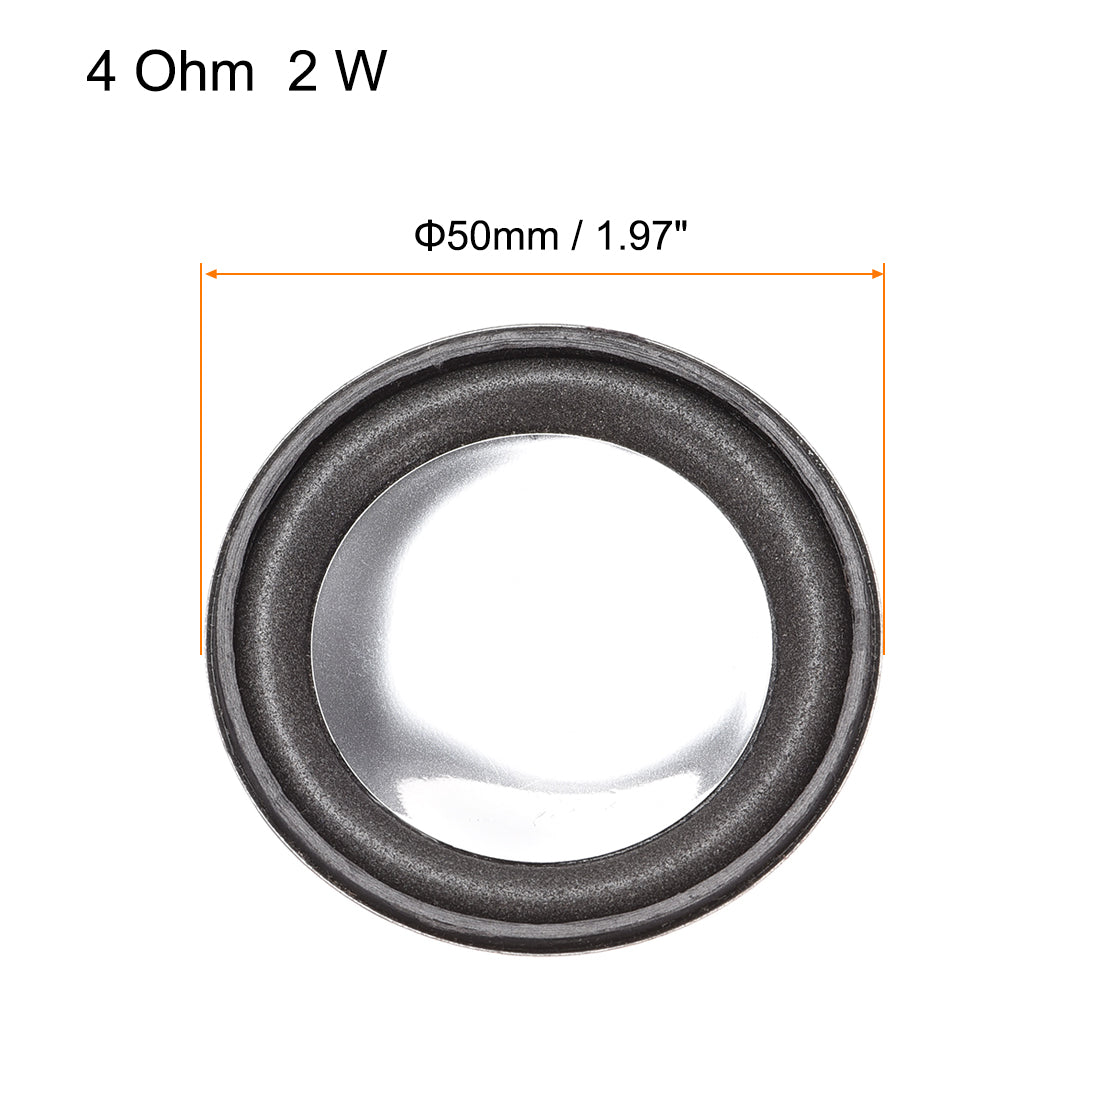 uxcell Uxcell 2W 4 Ohm DIY Magnetic Speaker 50mm Round-shape Replacement Loudspeaker for Megaphone 2pcs